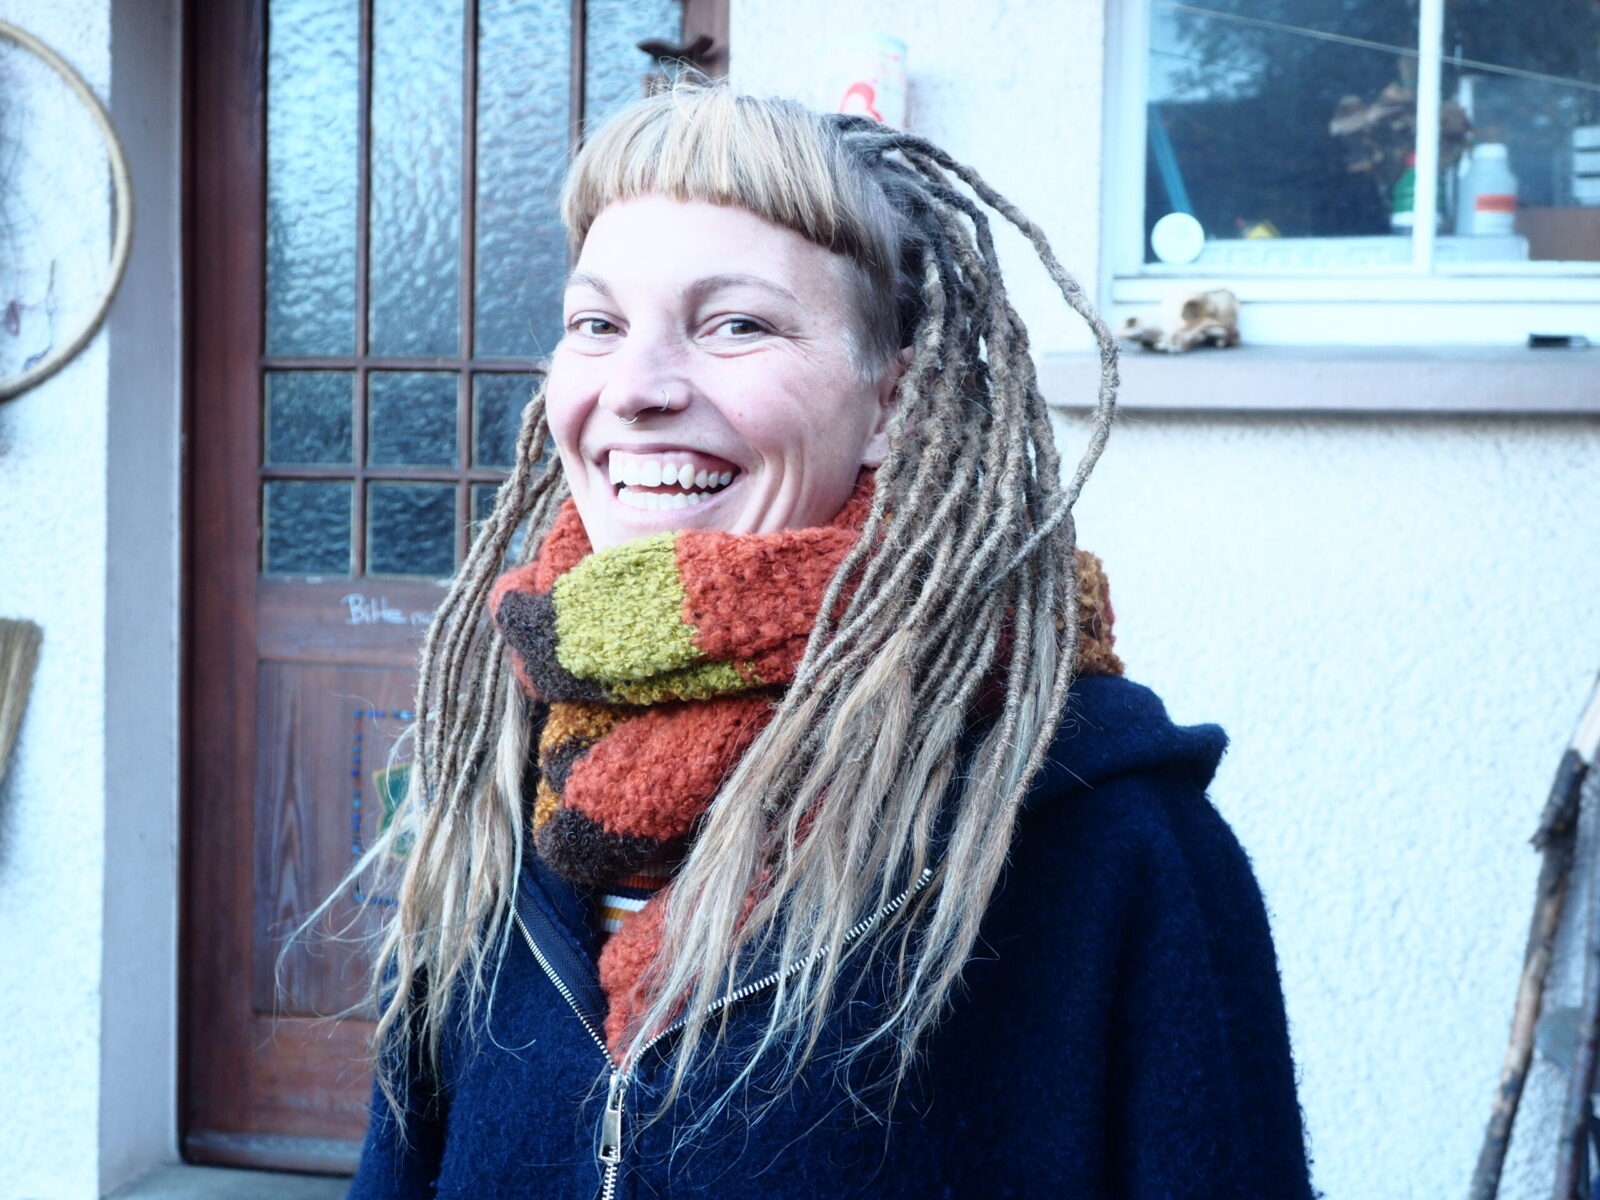 girl with dreads, dreads make happy